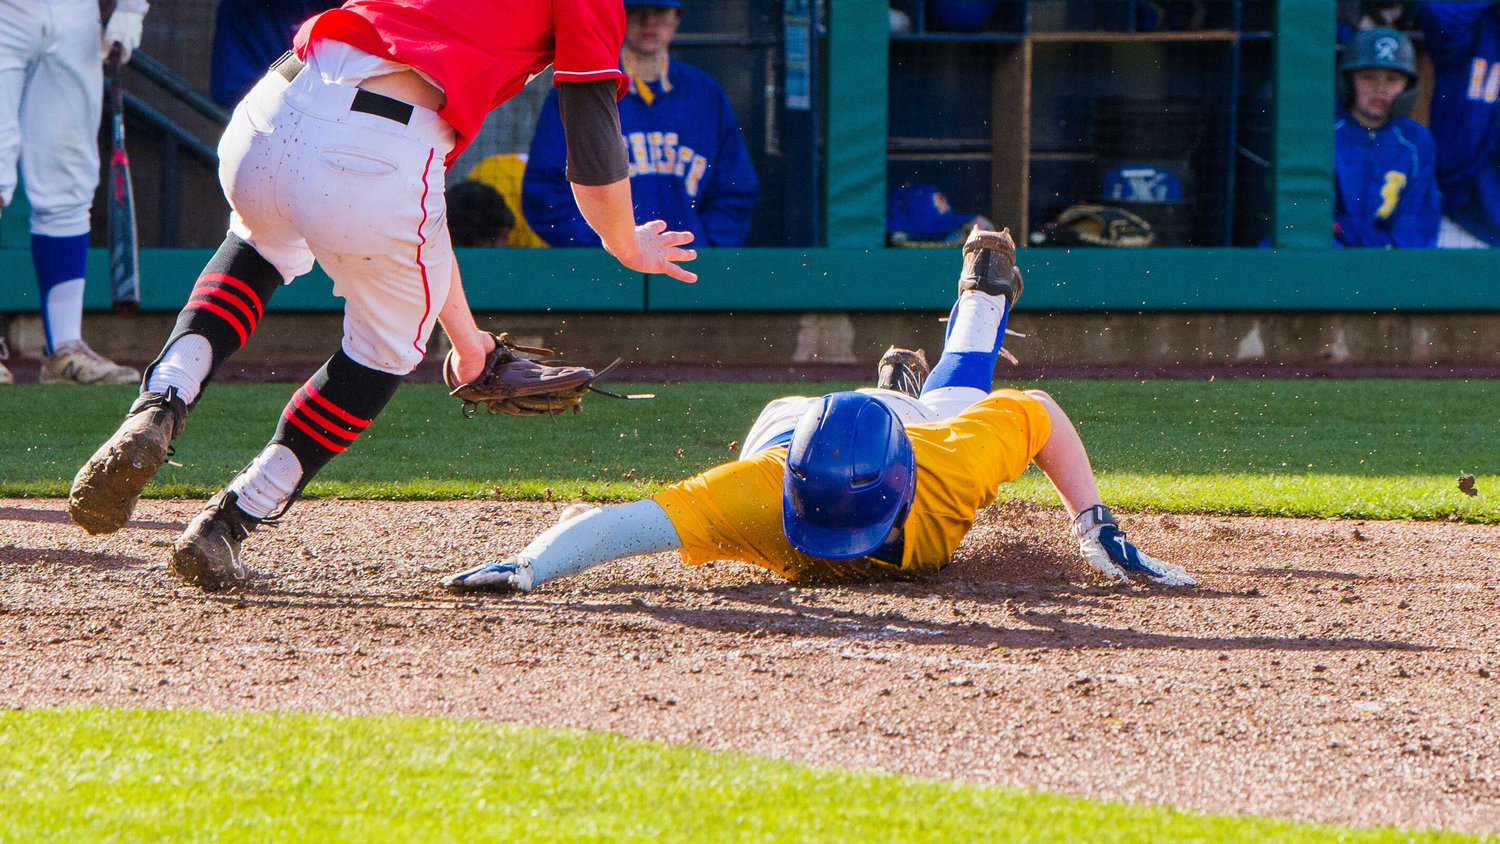 Rochester’s Henry Gramespacher (13) slides in safe at home during a game against Tenino at Cheney Stadium, home of the Tacoma Rainiers, Saturday afternoon.